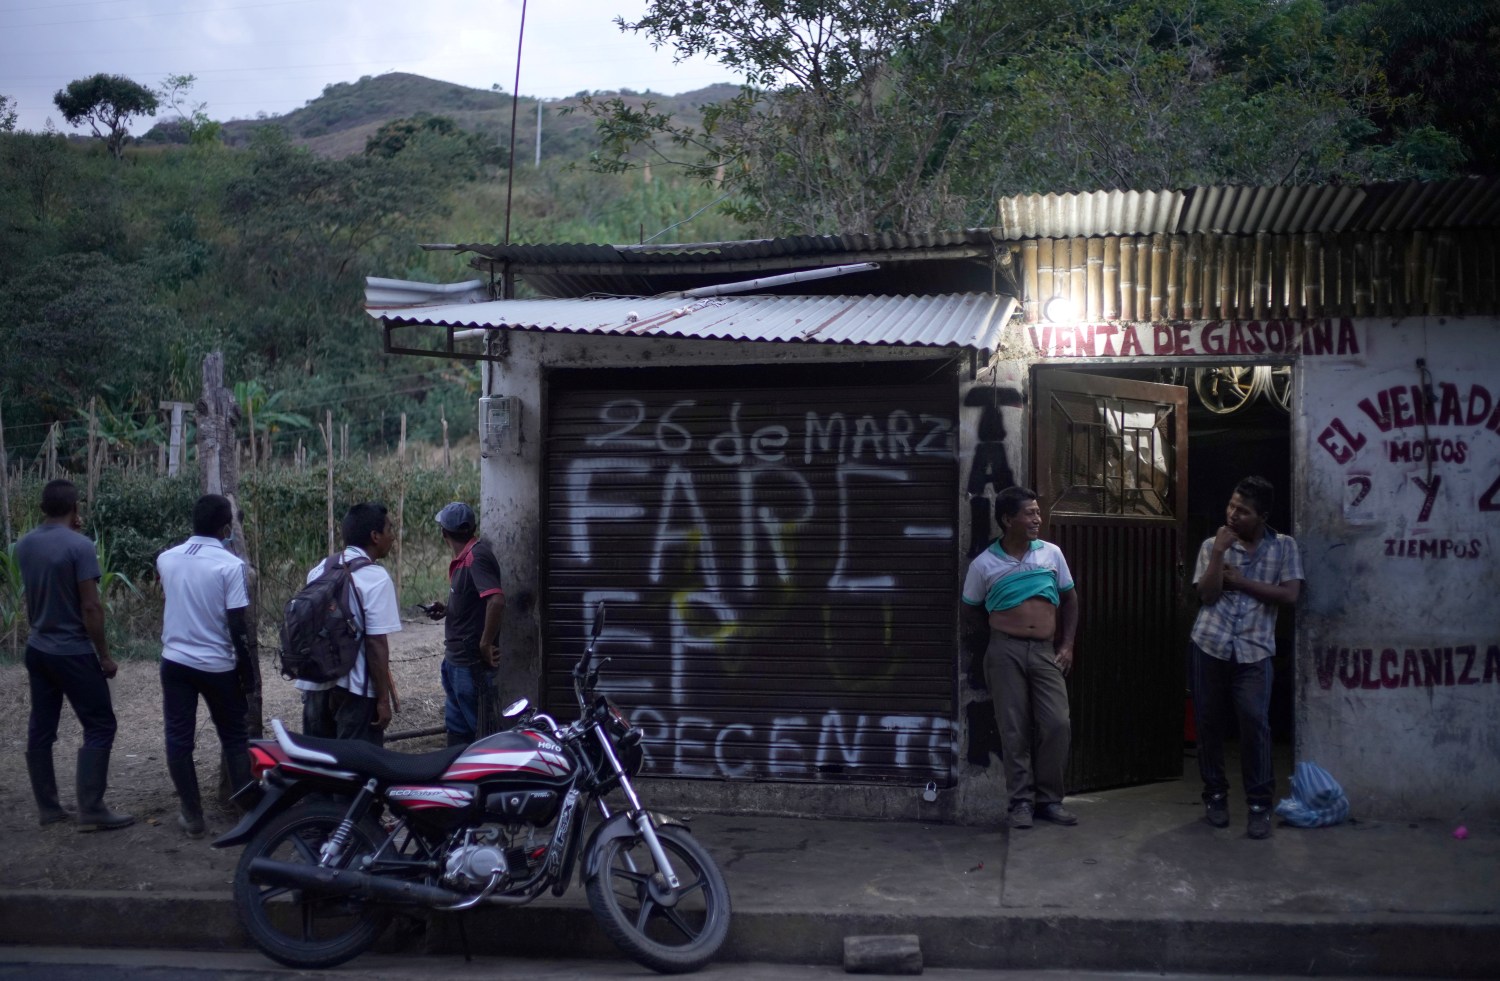 A graffiti that reads "FARC-EP present" is seen at the door of a mechanical workshop, on the road between El Palo and Toribio, where indigenous guards were killed by Revolutionary Armed Forces of Colombia (FARC) dissidents, according to the Colombian Ombudsman in Toribio, Colombia August 10, 2019. Picture taken August 10, 2019. REUTERS/Federico Rios - RC122B235D10